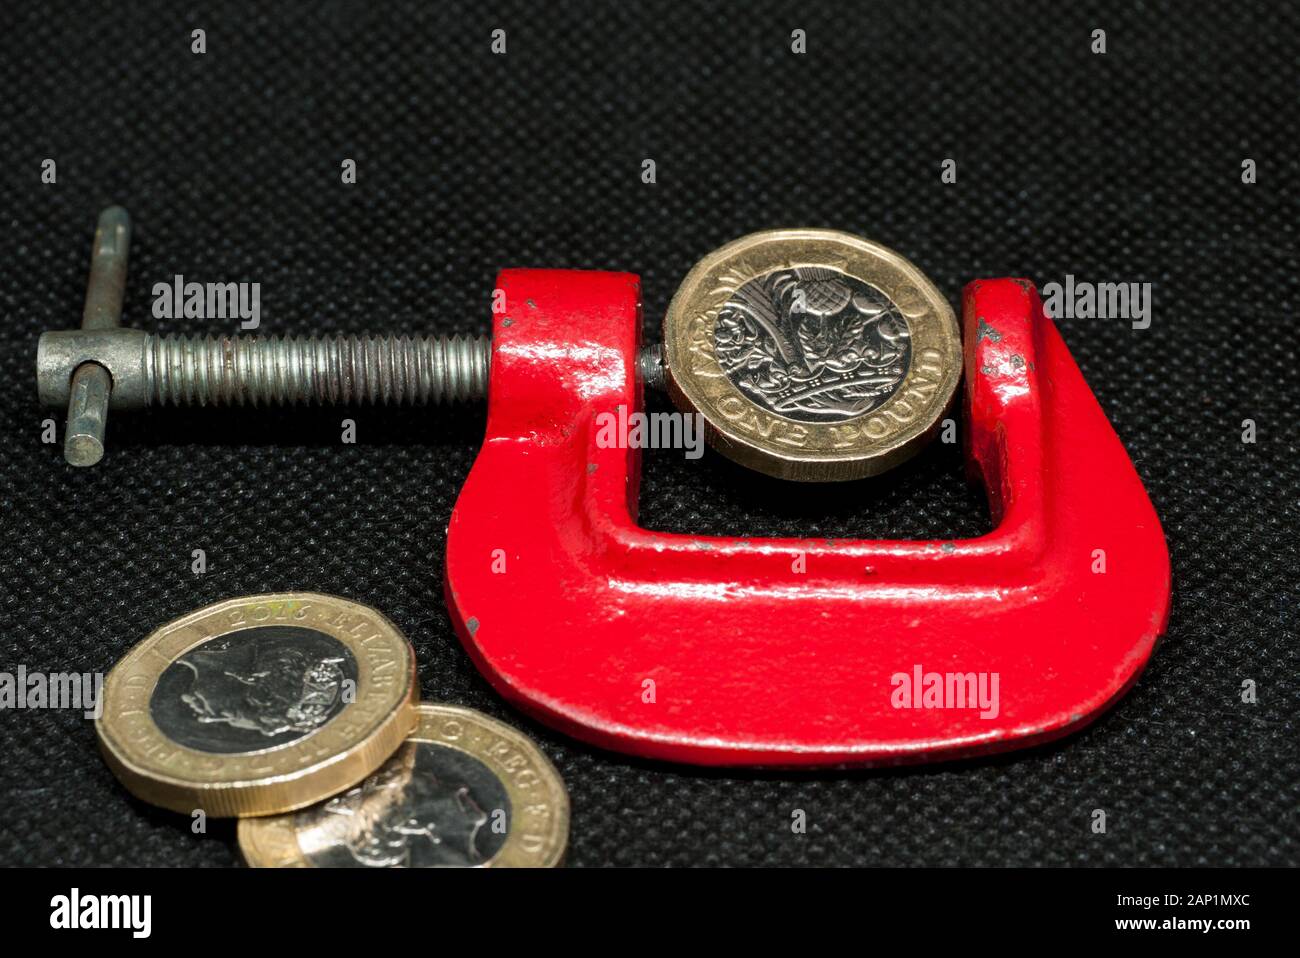 One Pound British Coin in a C Clamp, Uk. Stock Photo